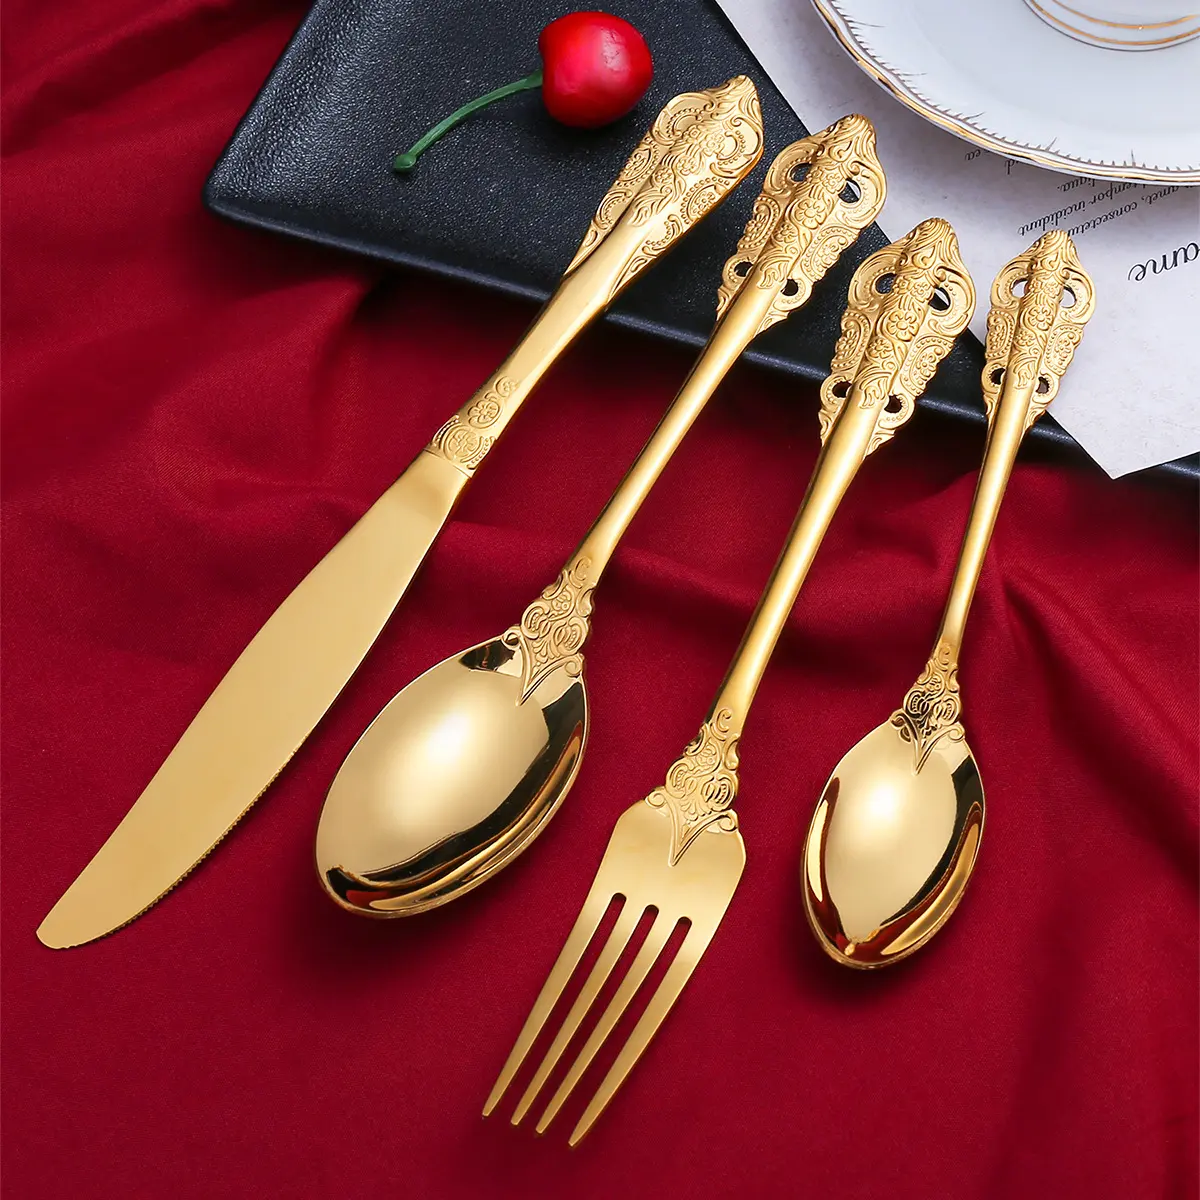 Stainless steel cutlery knife fork spoon set gold cutlery set for wedding decorations